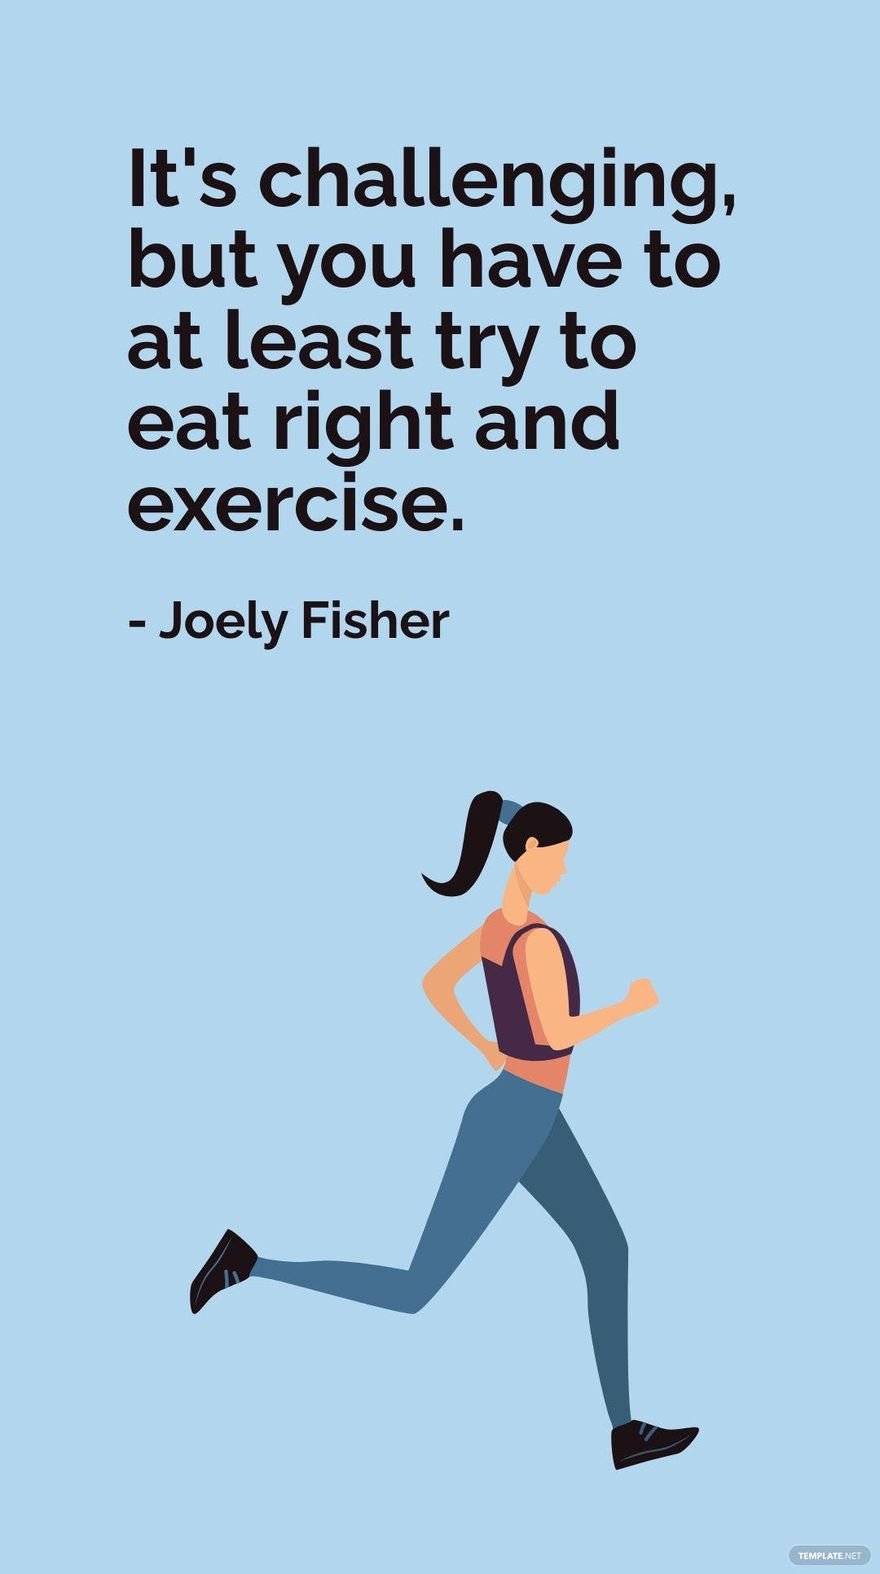 Joely Fisher - It's challenging, but you have to at least try to eat right and exercise.